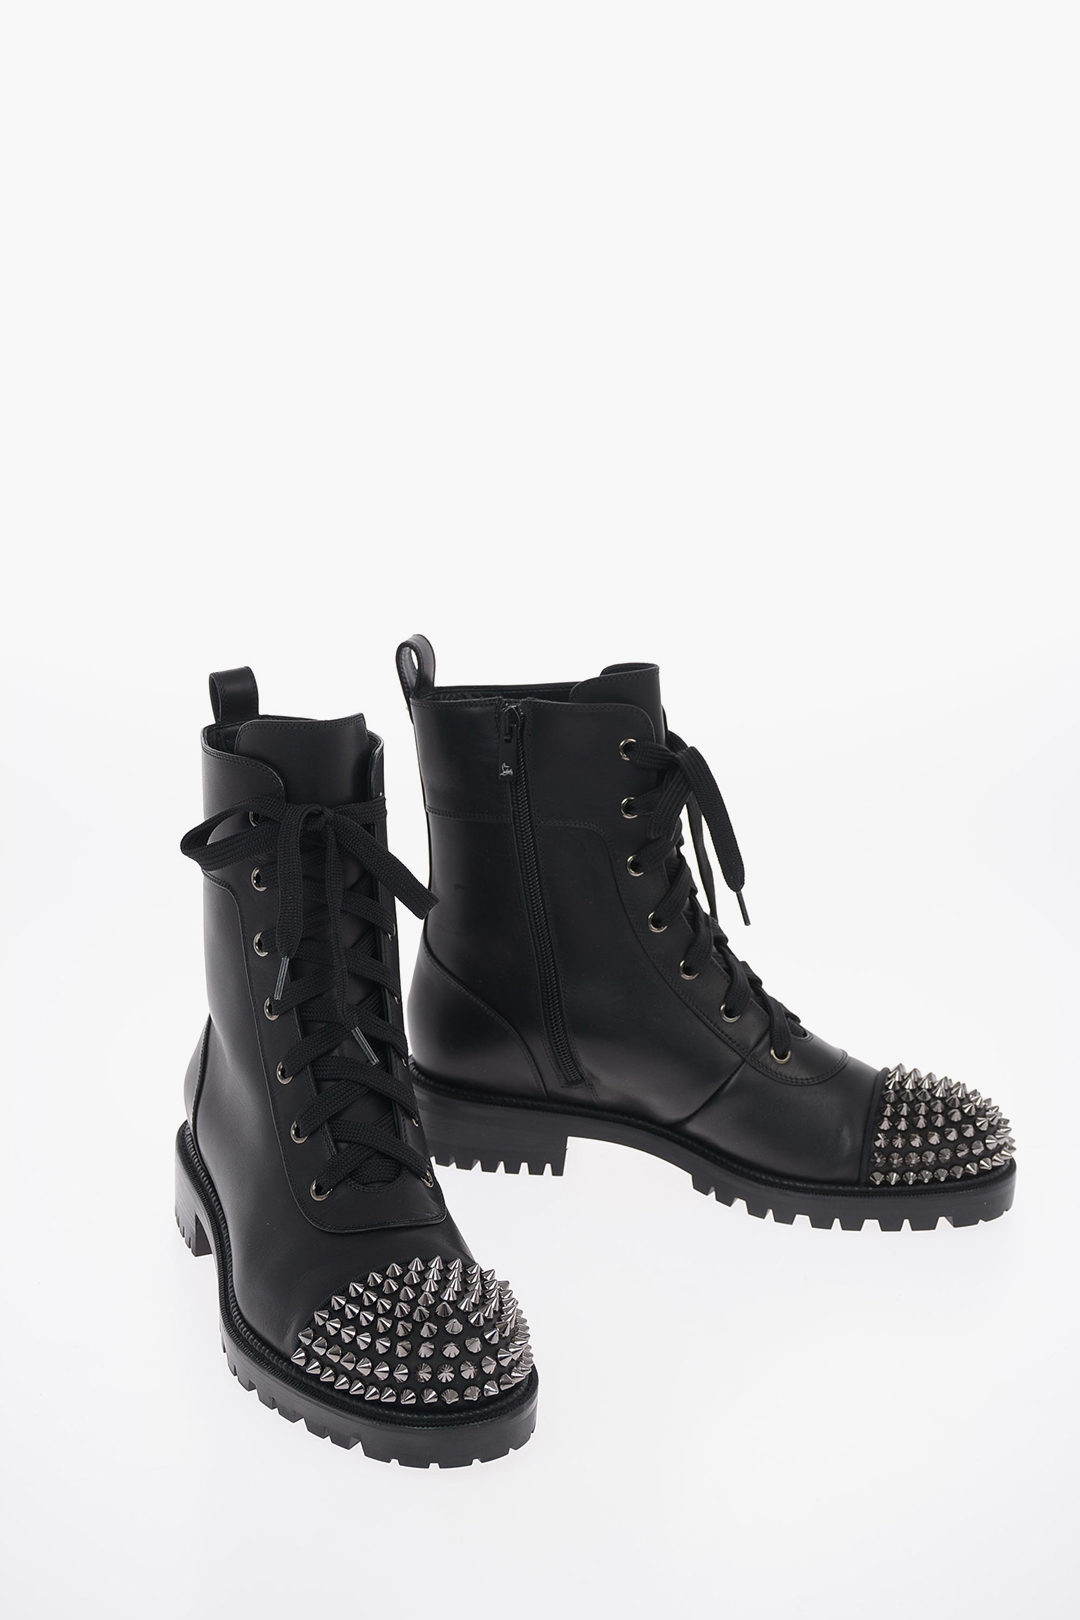 Christian Louboutin and studded boots women - Glamood Outlet